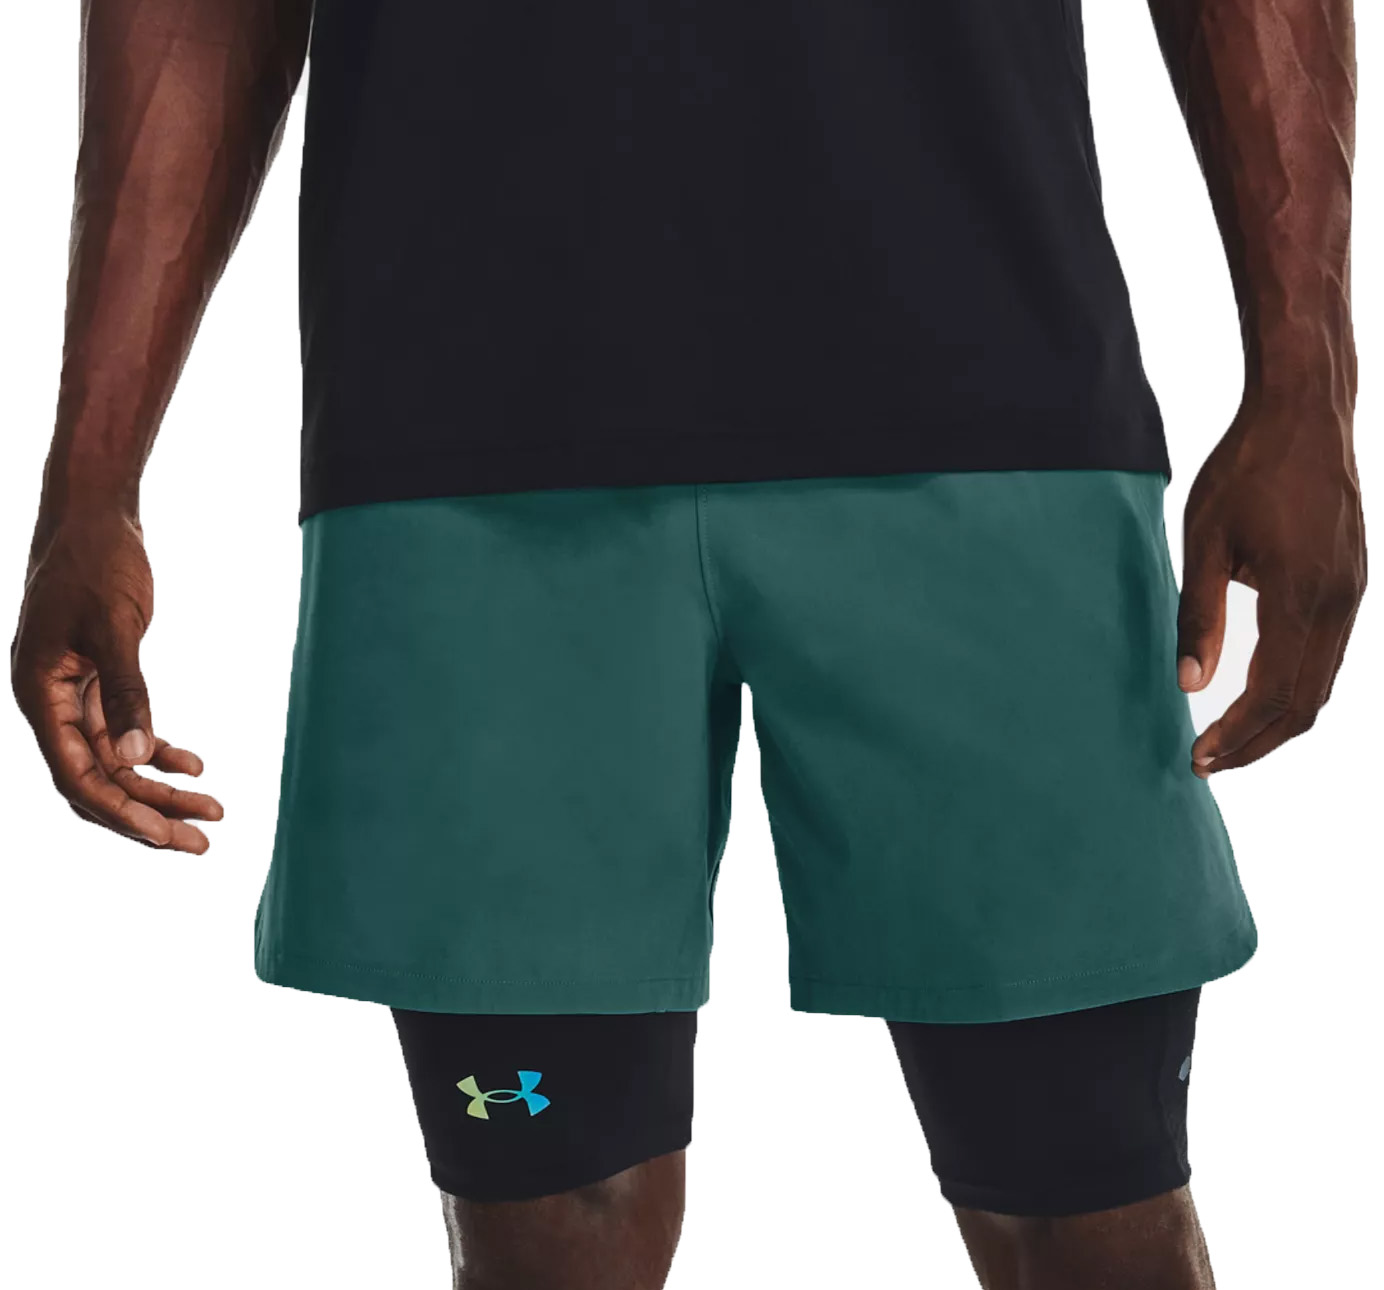 https://i1.t4s.cz/products/1376782-722/under-armour-ua-peak-woven-shorts-grn-591934-1376782-723.jpg